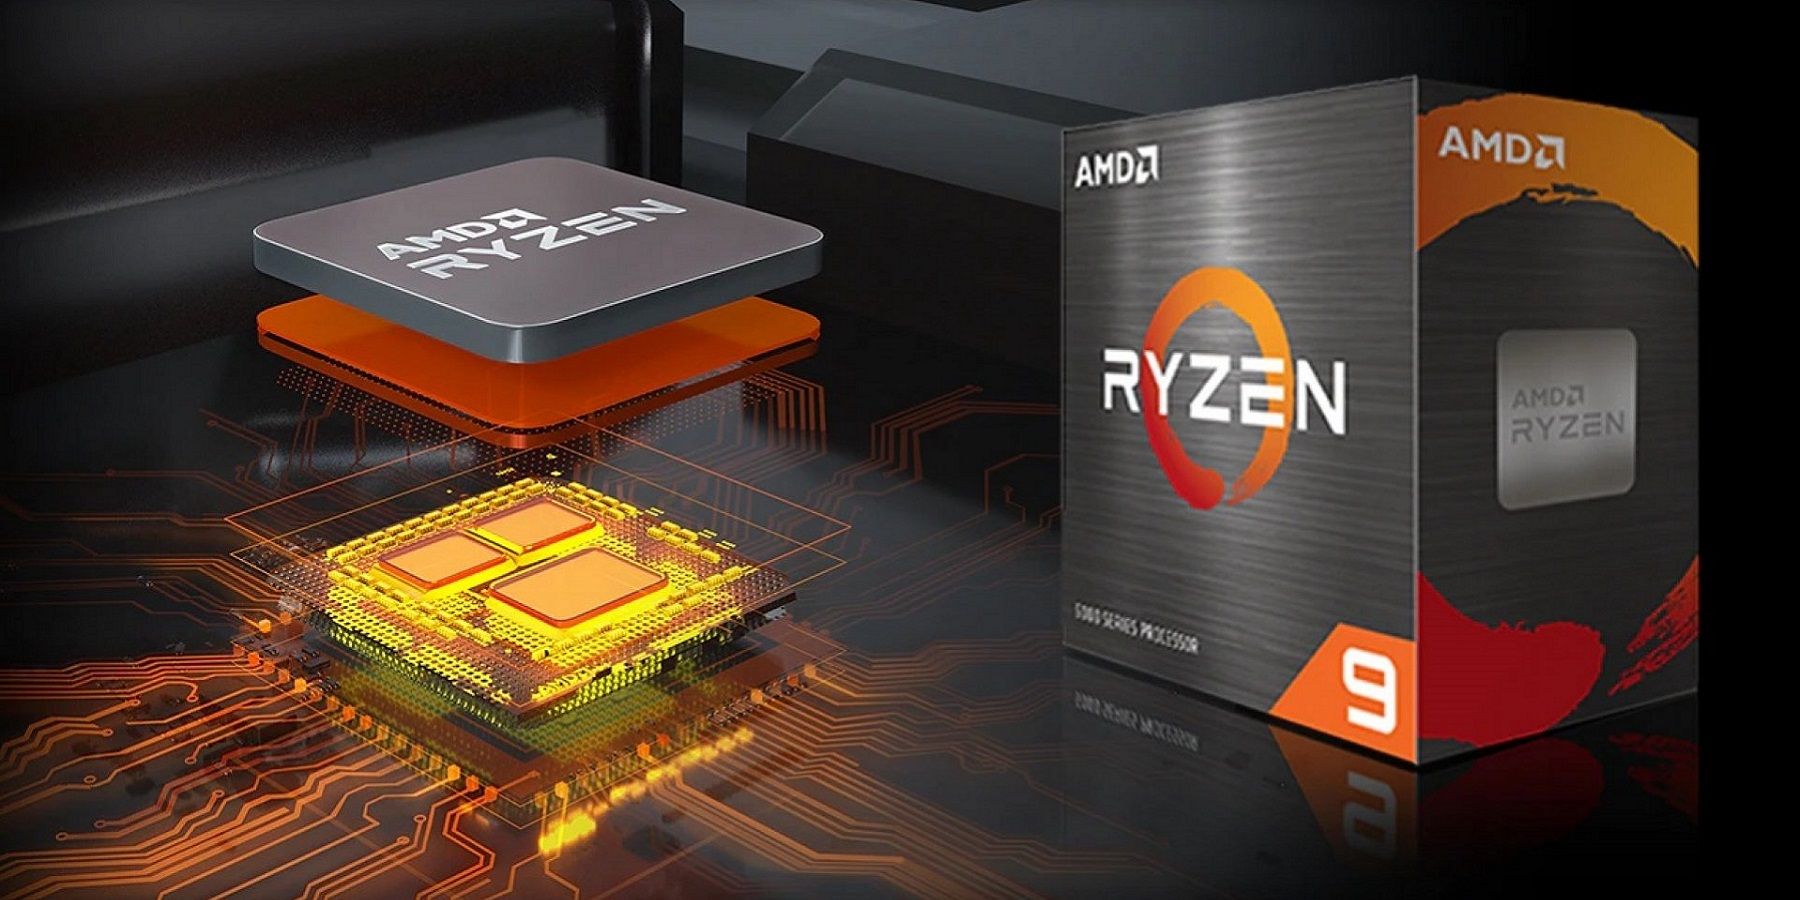 Rendered image showing an AMD Ryzen CPU and its box next to it.